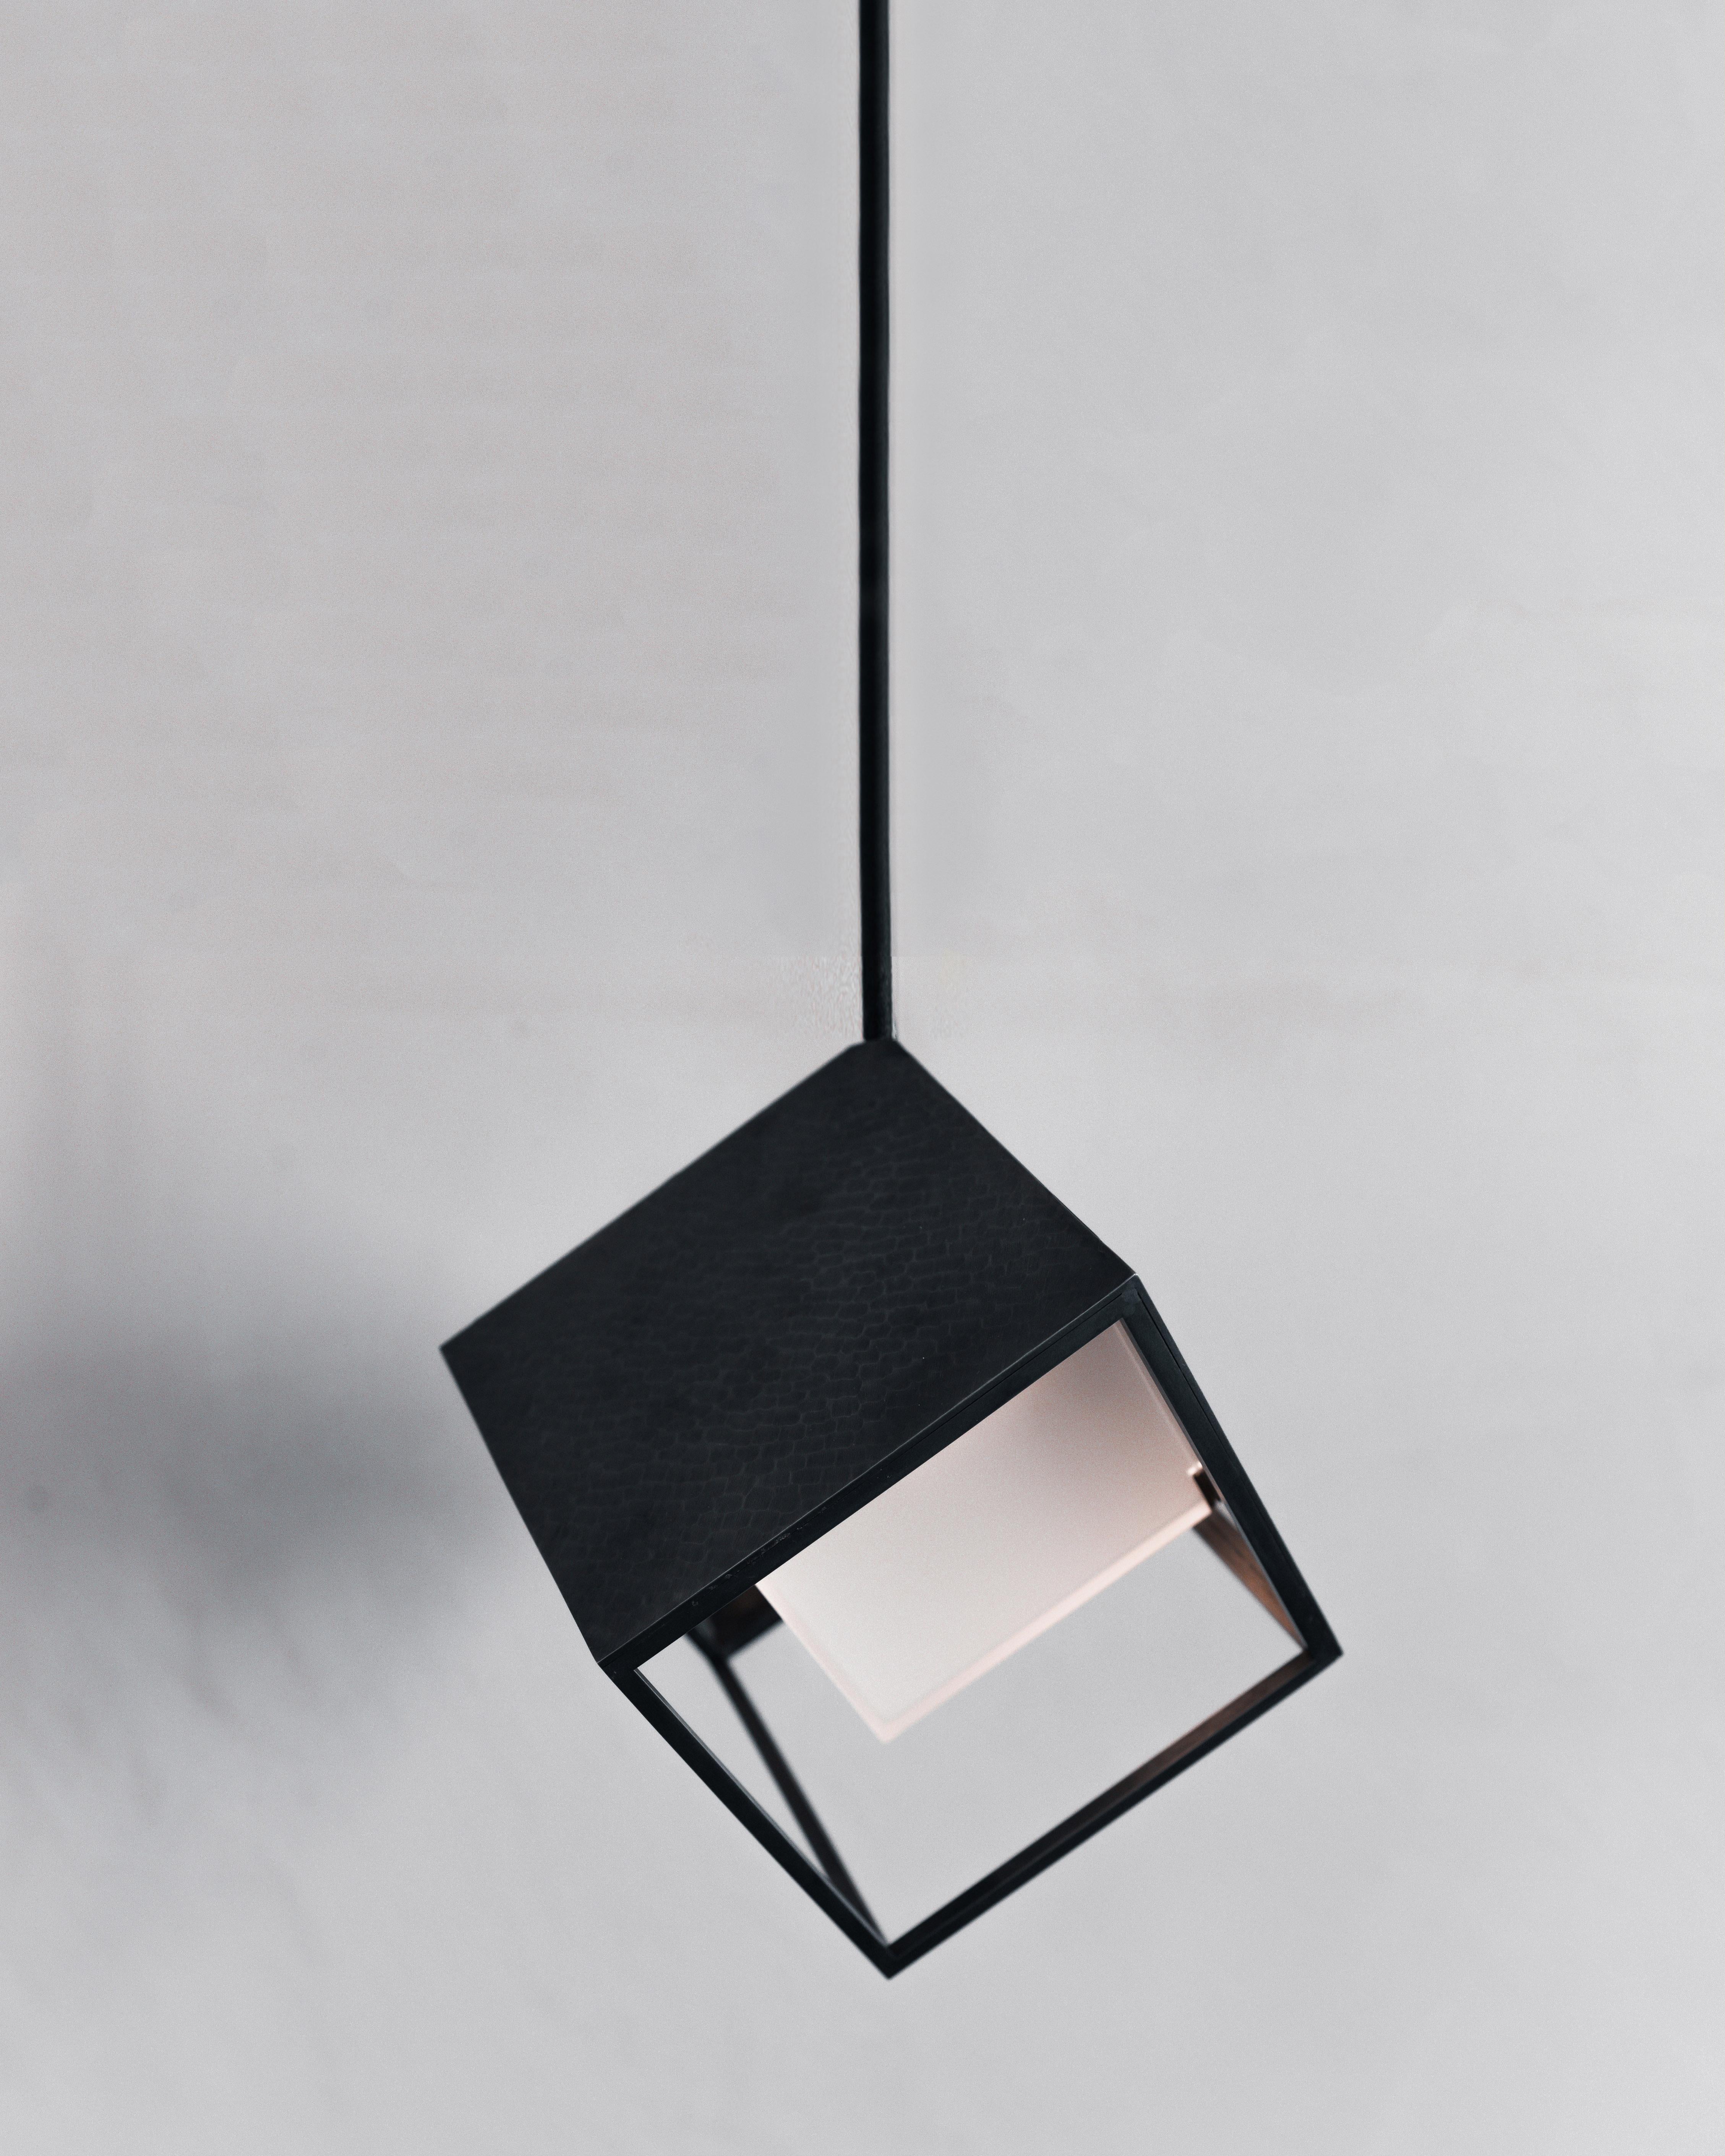 UNIS is the unit cell of the ISOS collection, a pendant light inspired by the simplest and most common shape found in crystals and minerals, the cube. The geometry of the steel pendant is characterised by a thin frame, and it is partially enclosed